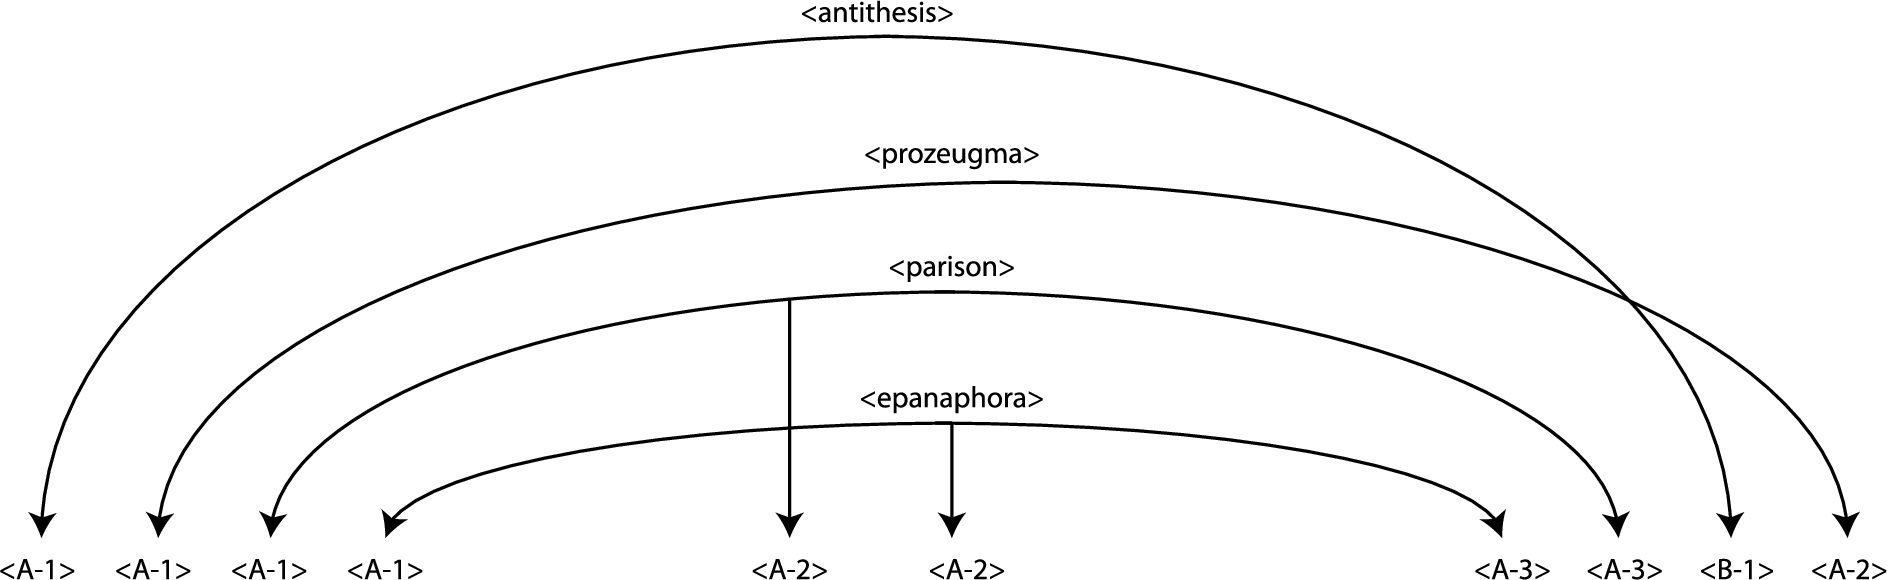 The interpenetration of figures can lead to syntax errors for inline XML markup, illustrated by the crossing antithesis and prozeugma arcs in this representation of Example 32.